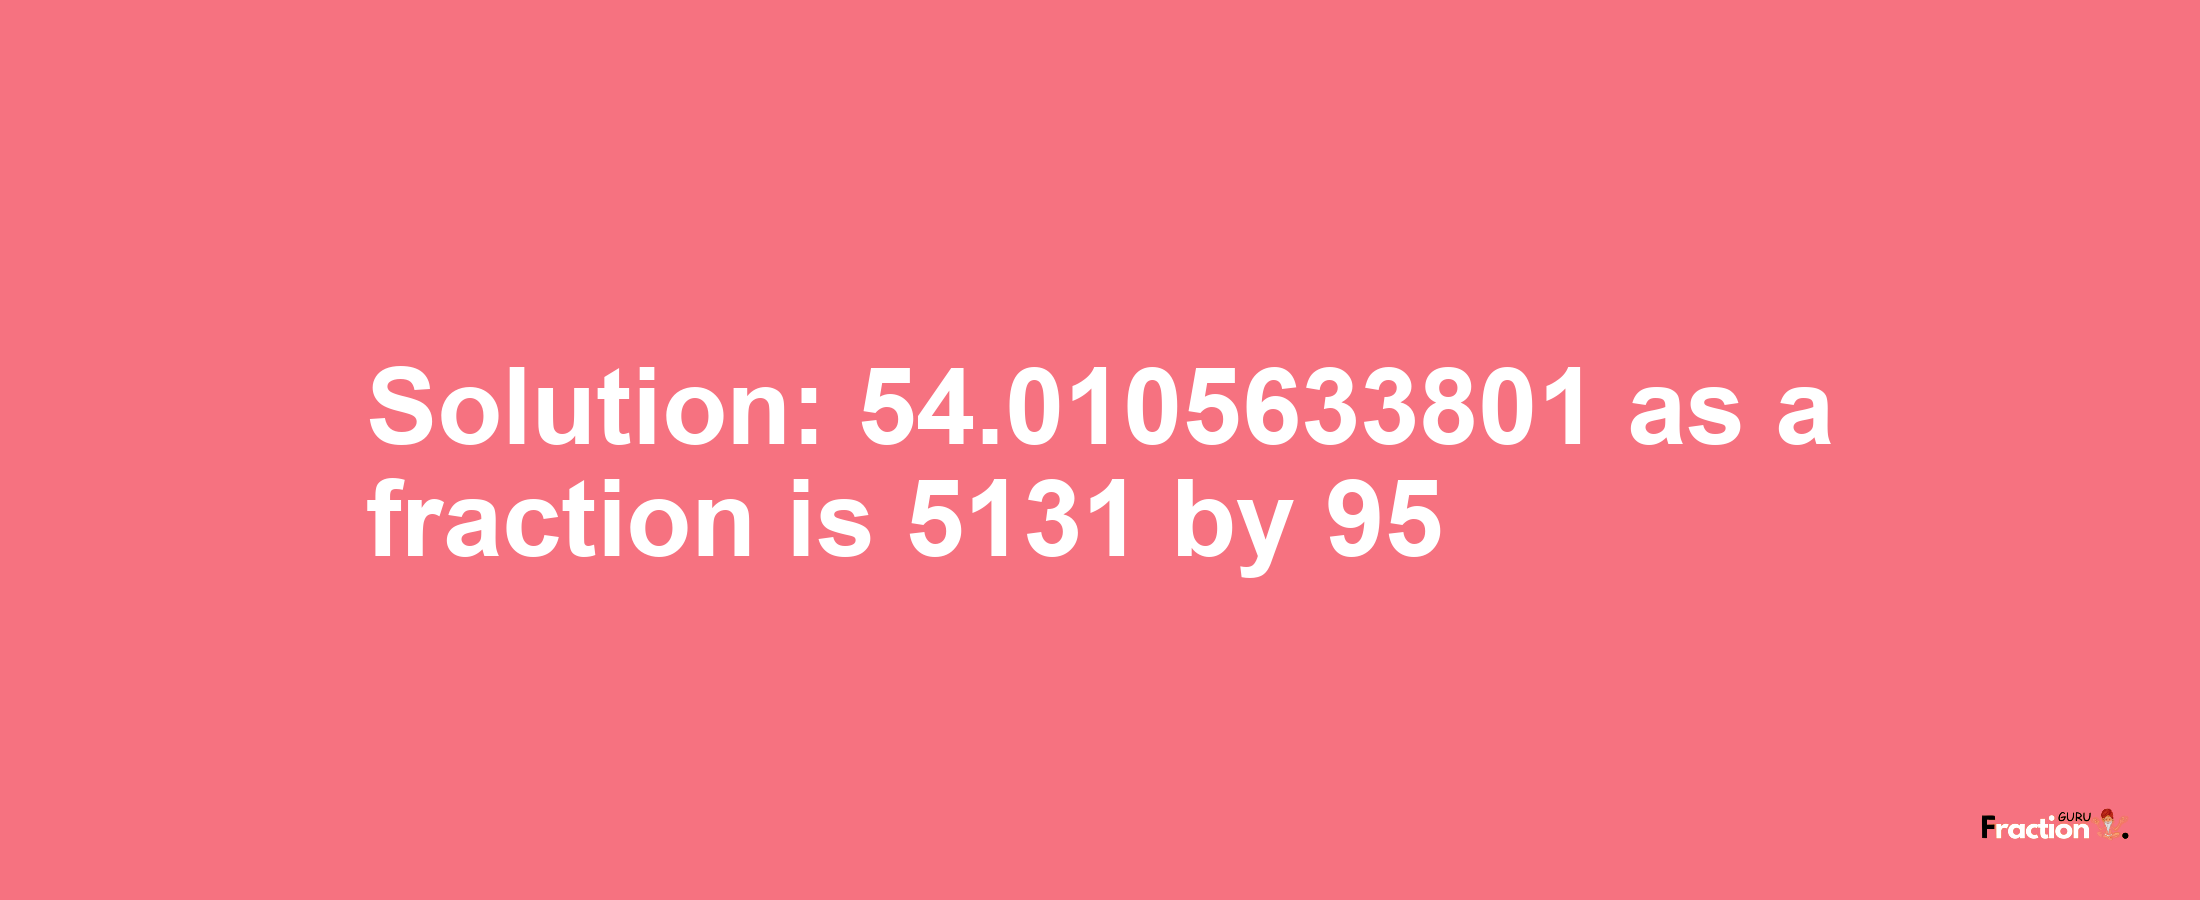 Solution:54.0105633801 as a fraction is 5131/95